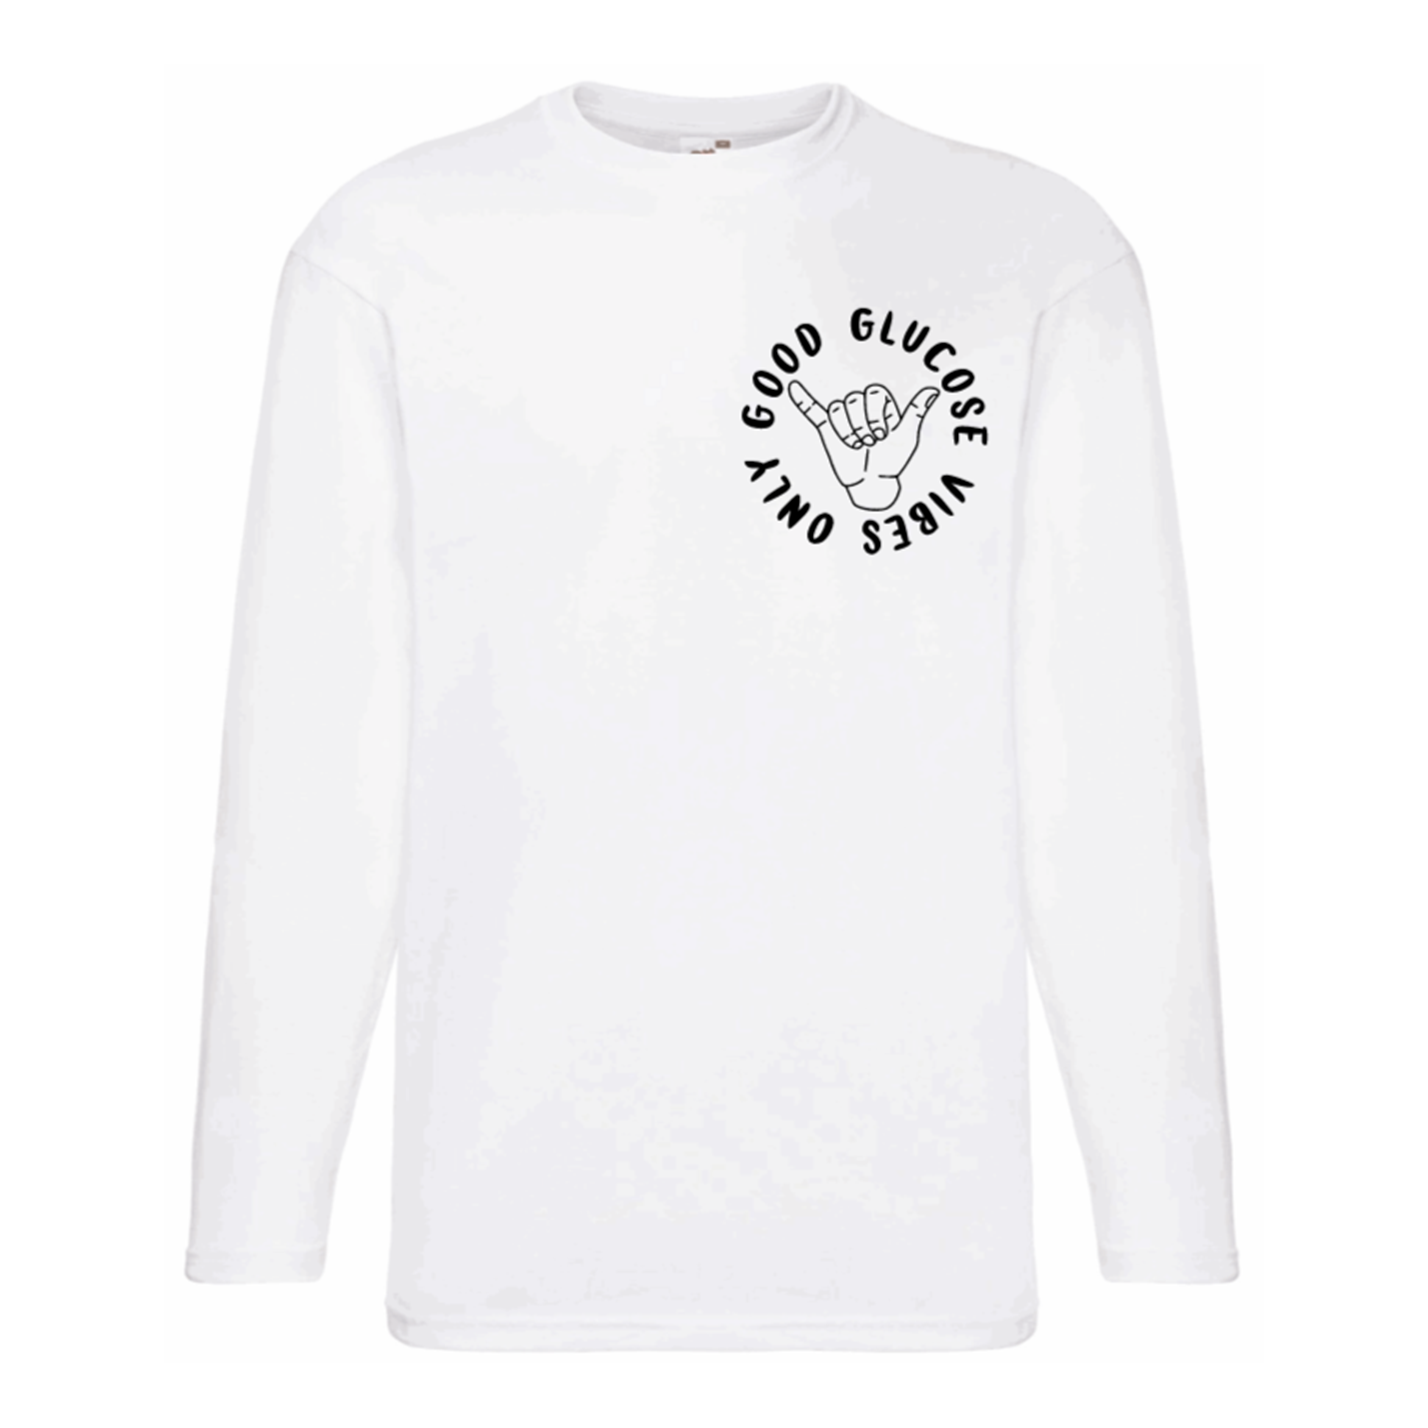 Good Glucose Vibes Only Long Sleeve T Shirt